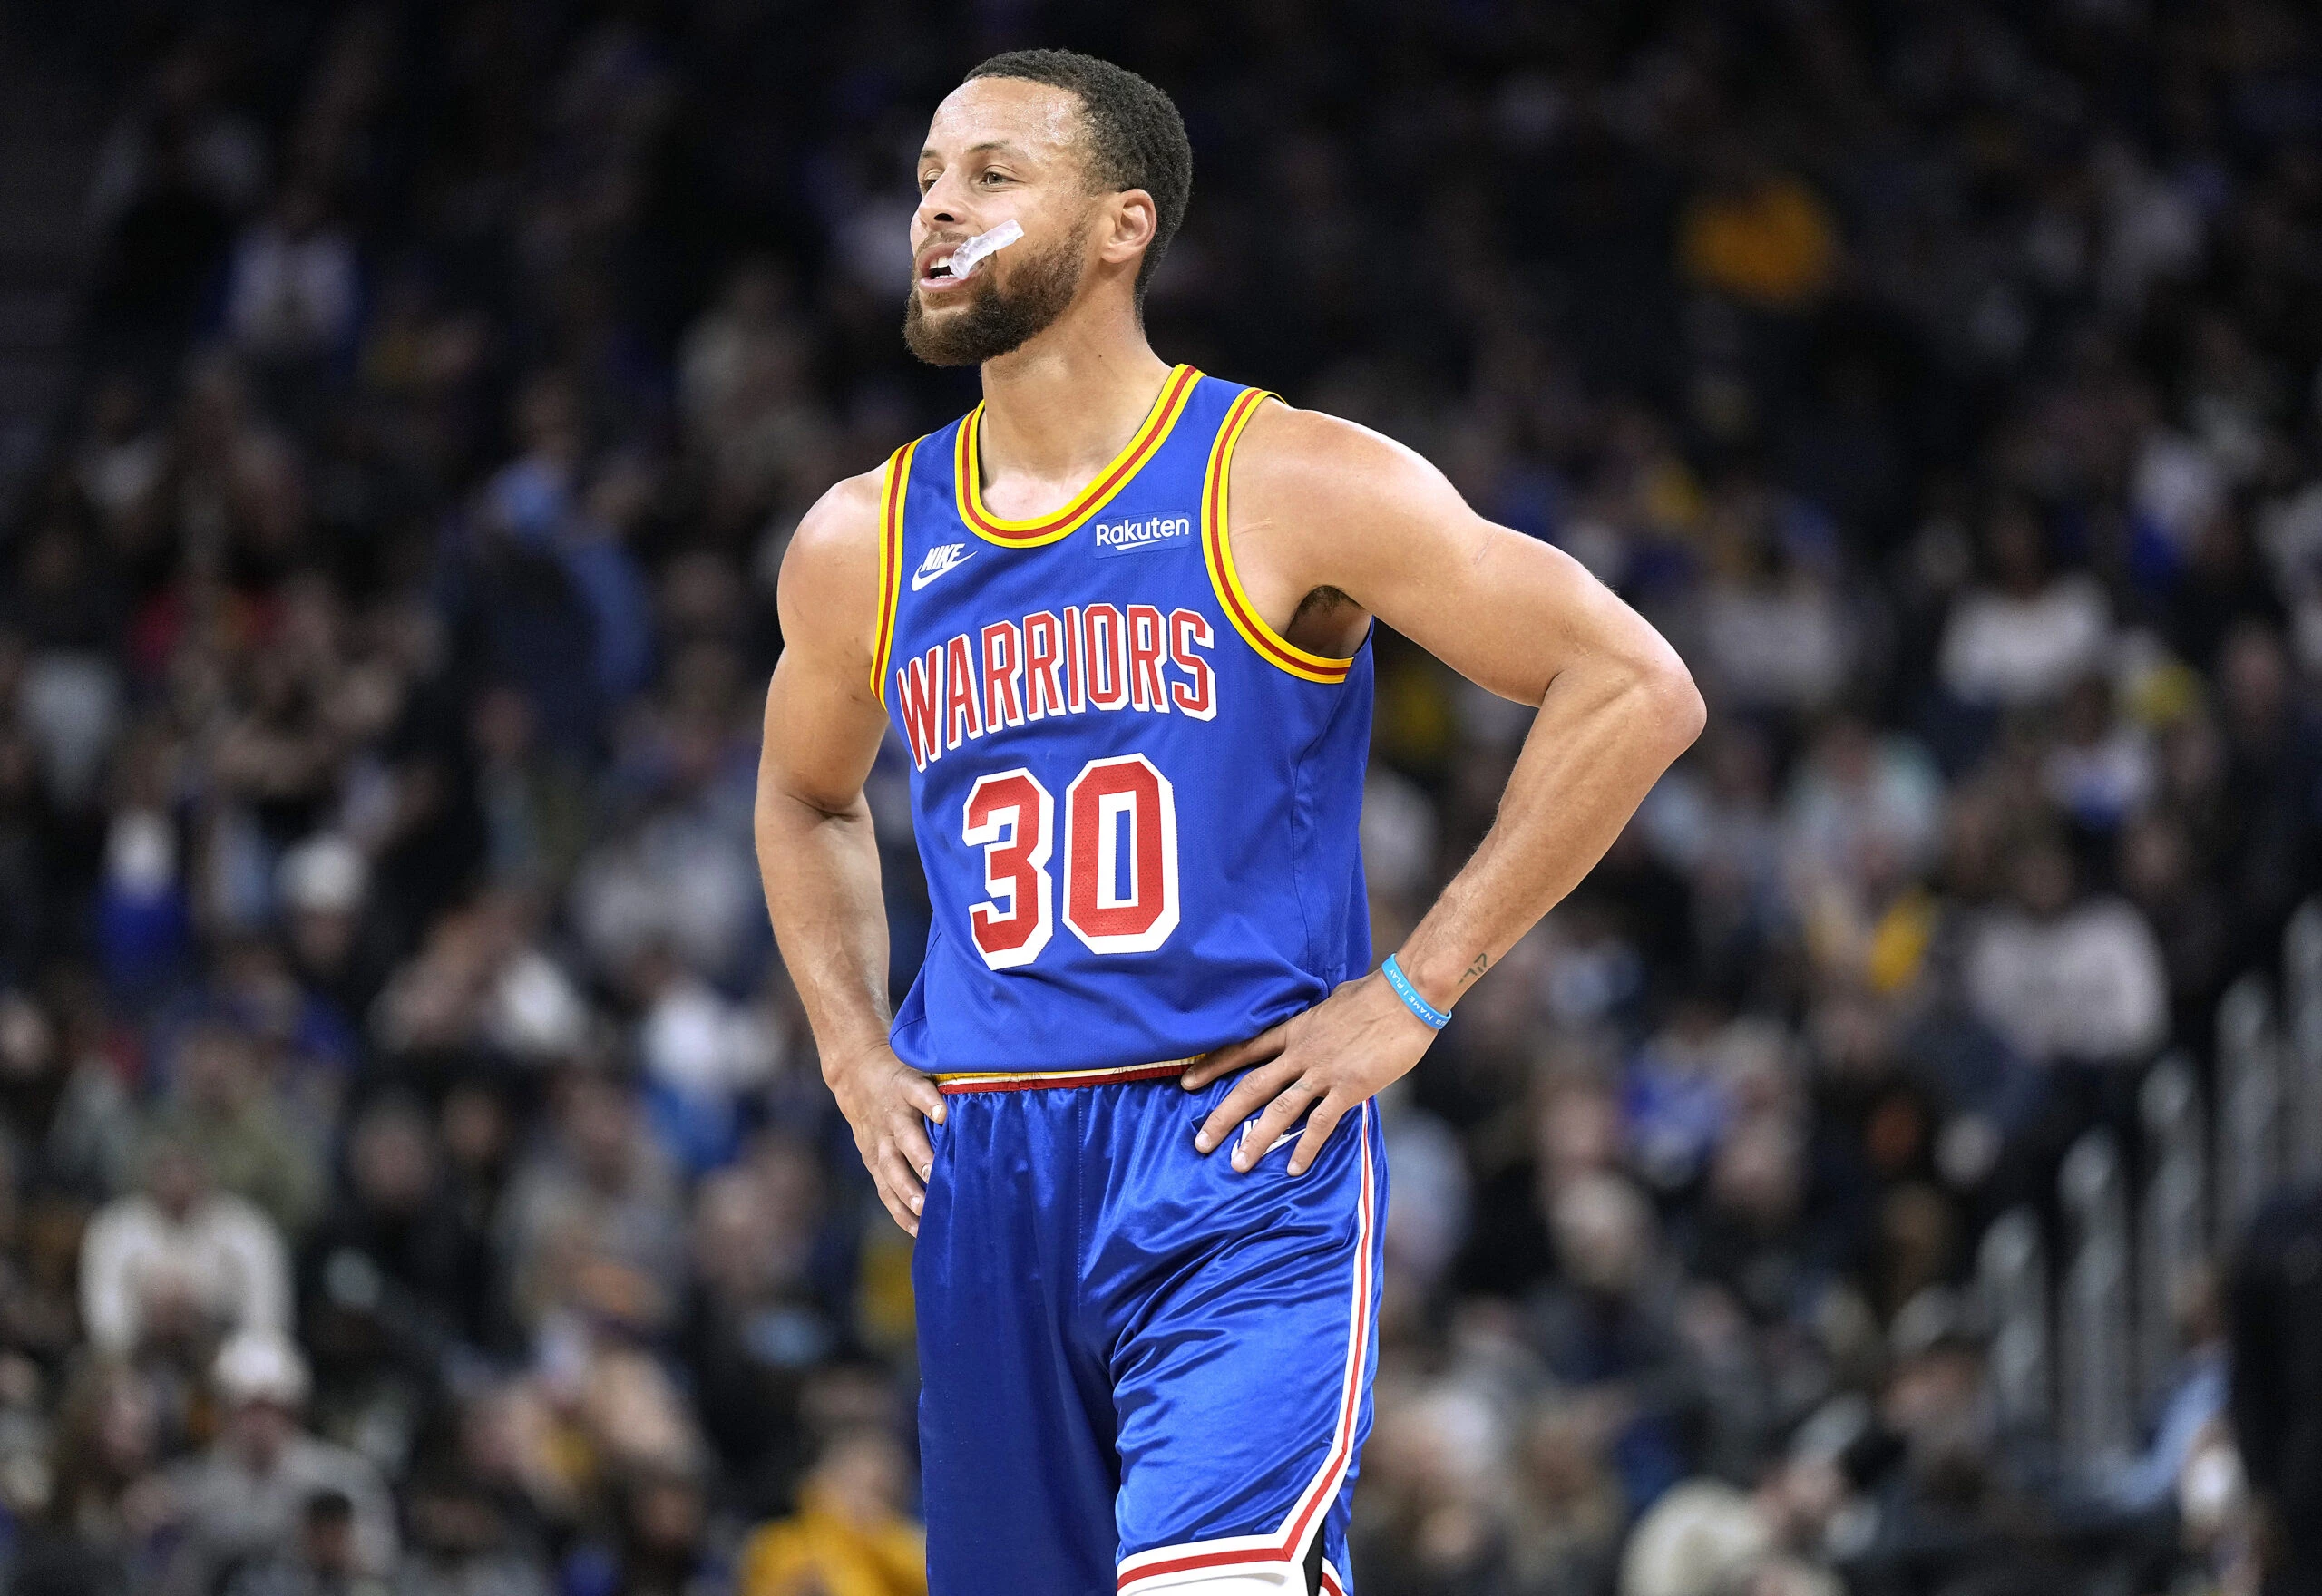 NBA Finals MVP odds and predictions: Stephen Curry leads the pack, but  could a former Big Ten star rise to the occasion? 